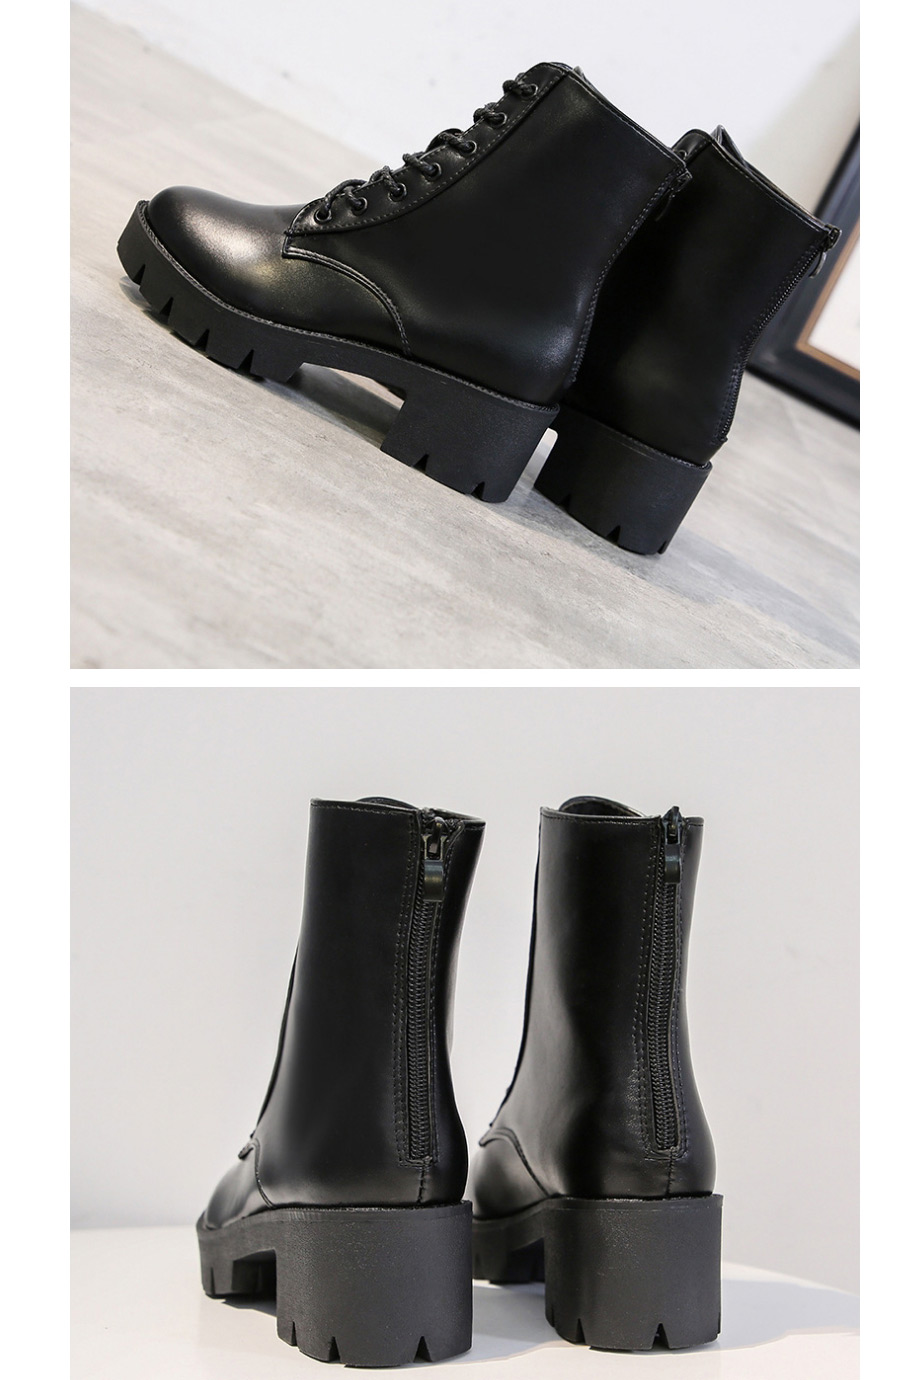 Fashion Black Round Toe Non-slip Lace-up Mid-tube Thick Heel Zip Martin Boots,Slippers